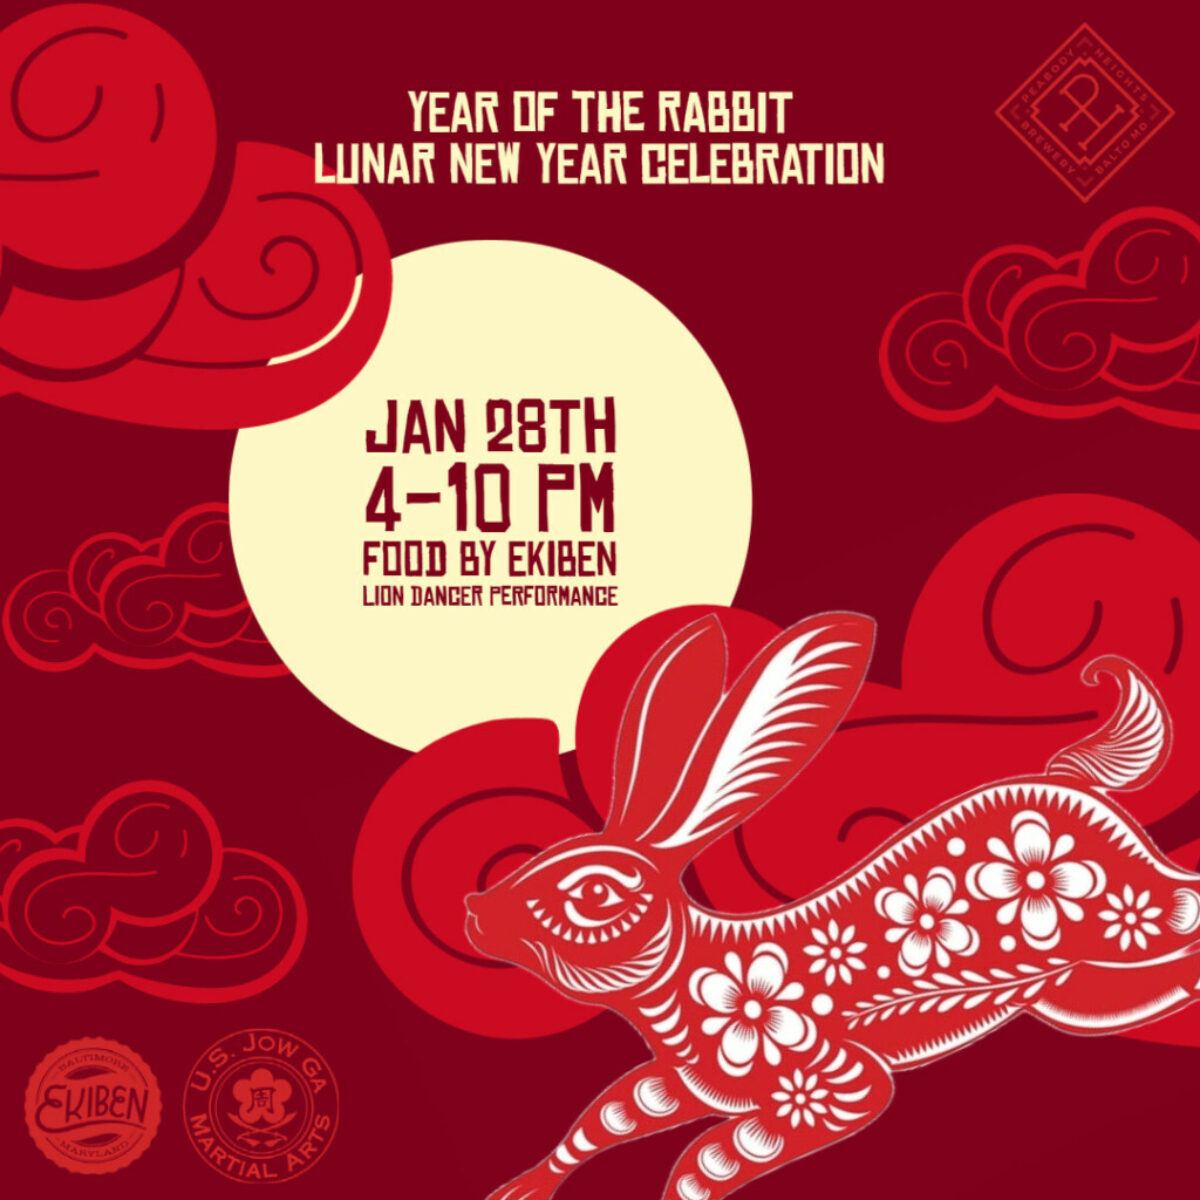 Lunar New Year Celebration at Peabody Heights Brewery